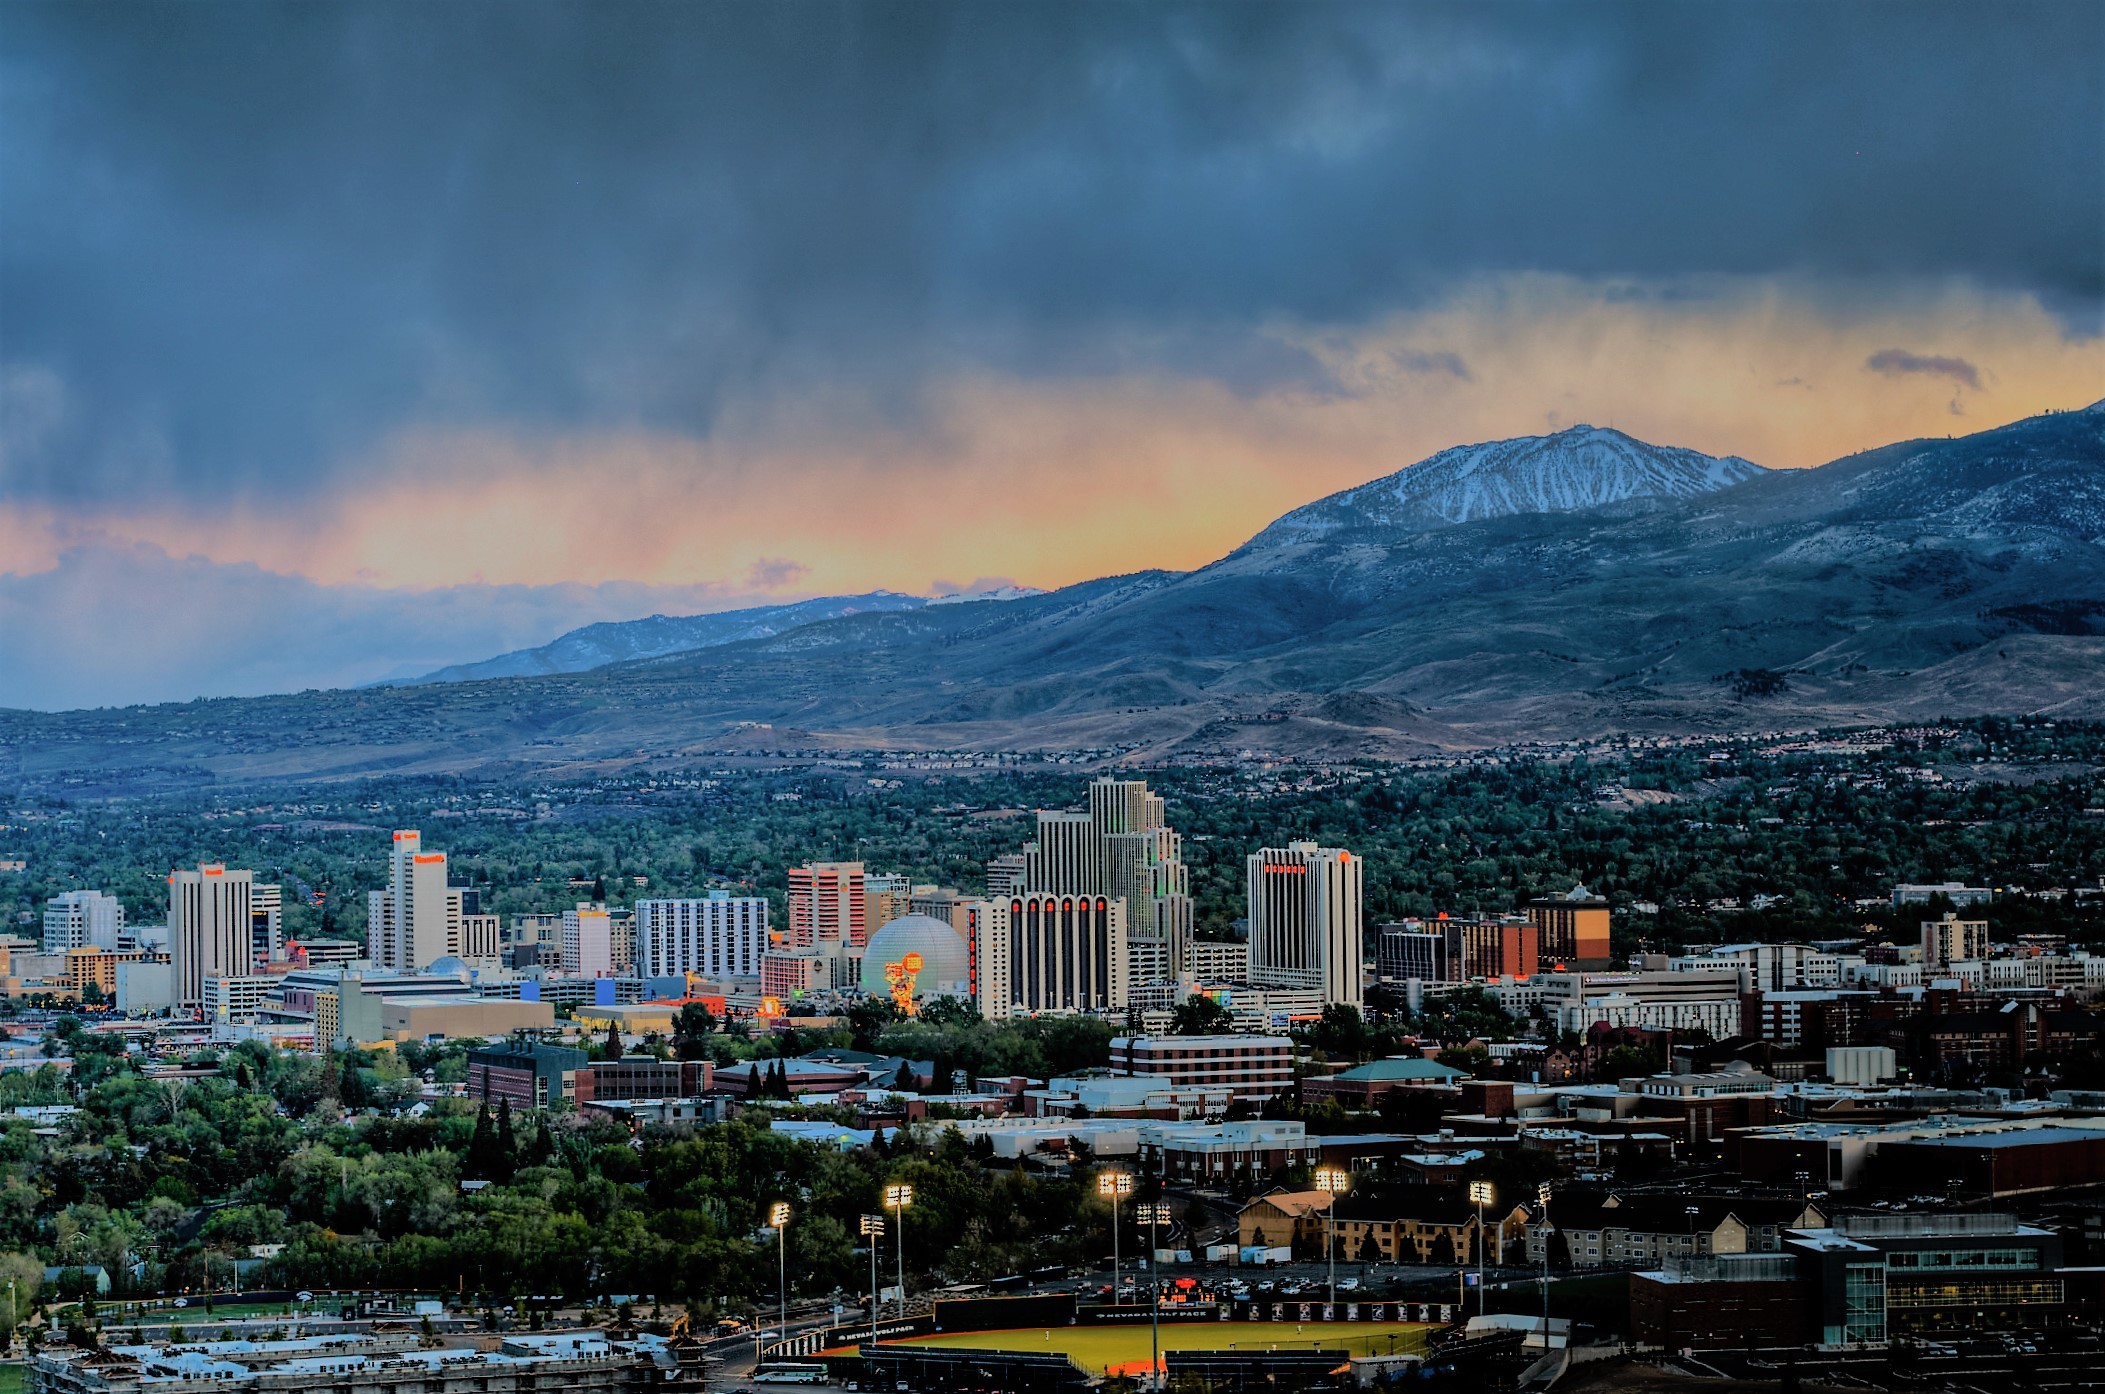 Search homes for sale in Reno Nevada Sparks 